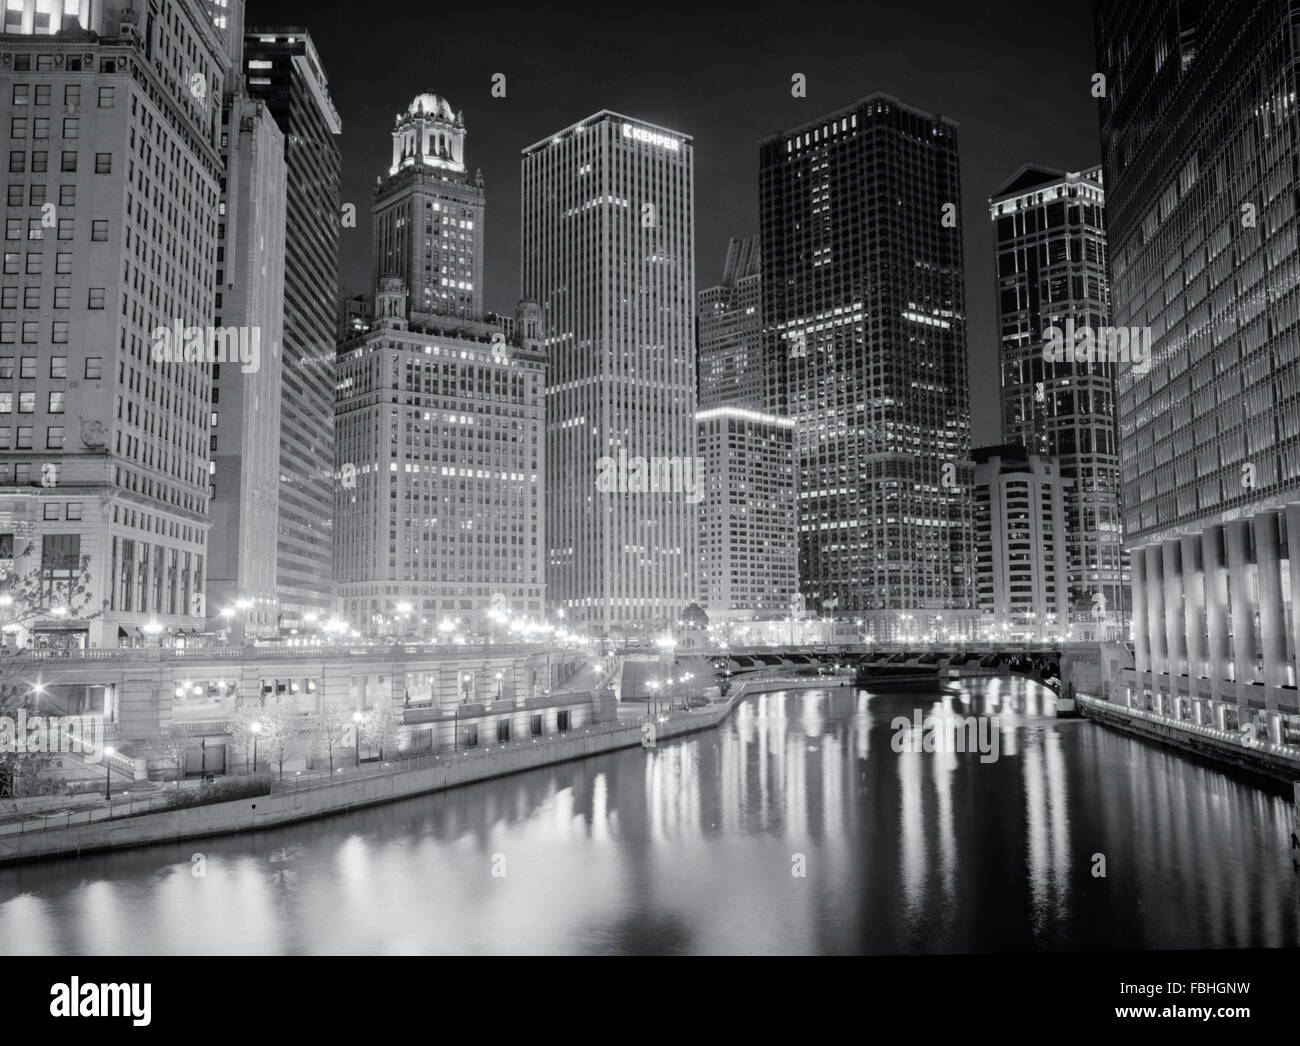 Wabash Avenue bridge over the Chicago River at night as seen from Michigan Avenue Stock Photo